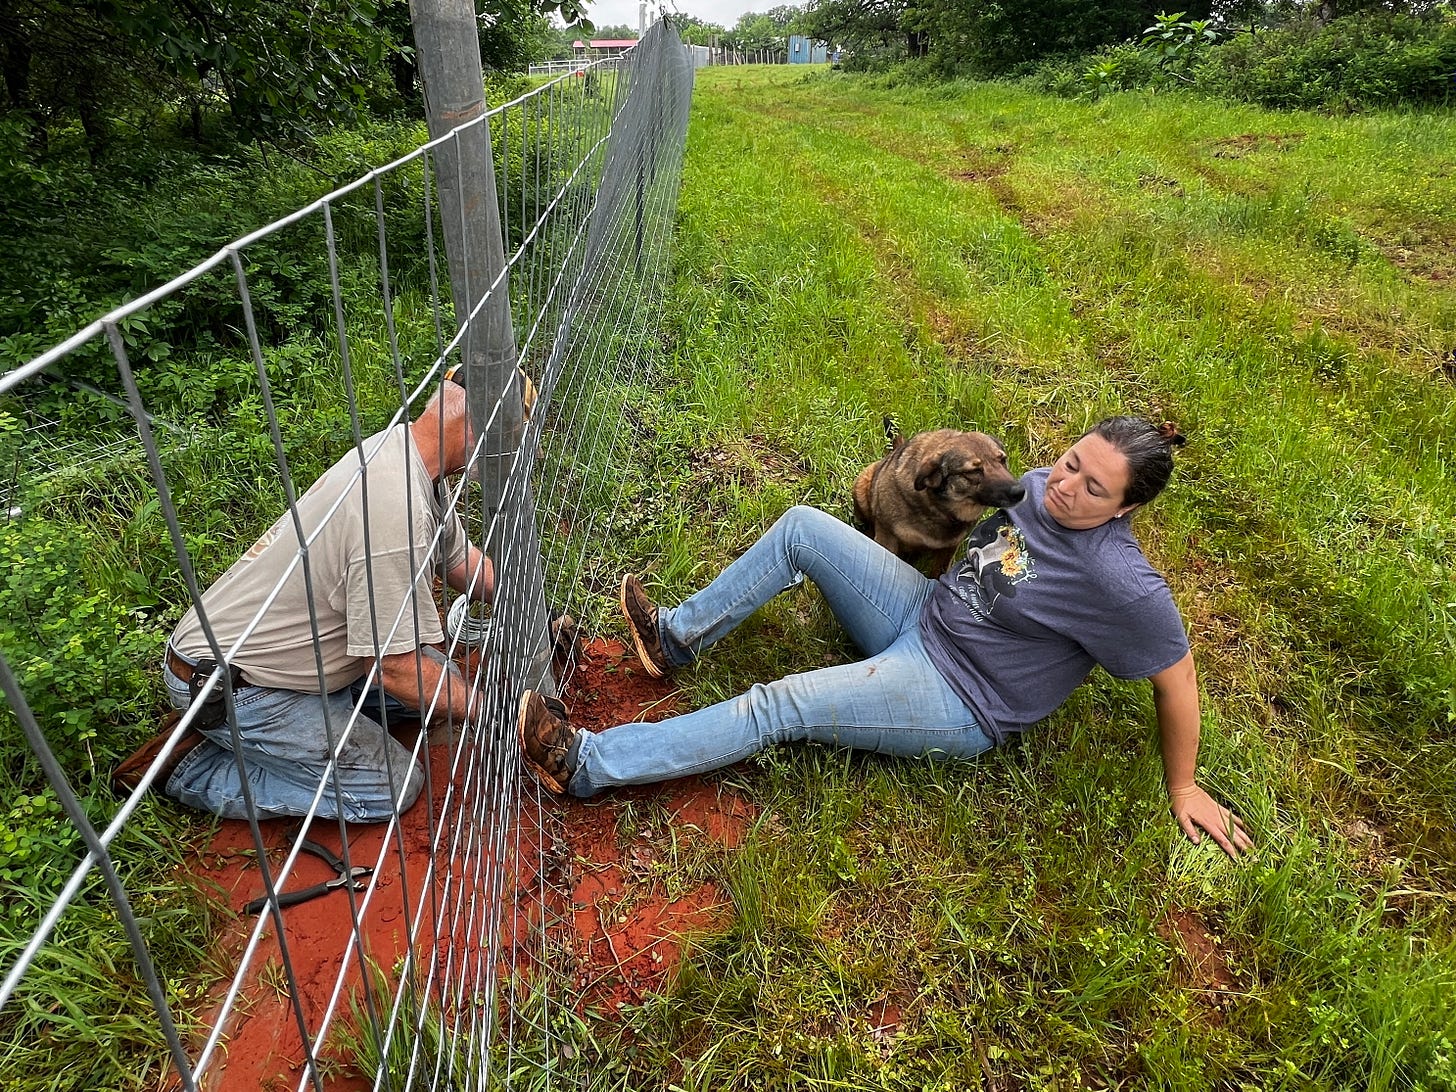 A man, woman and a dog installing a fence